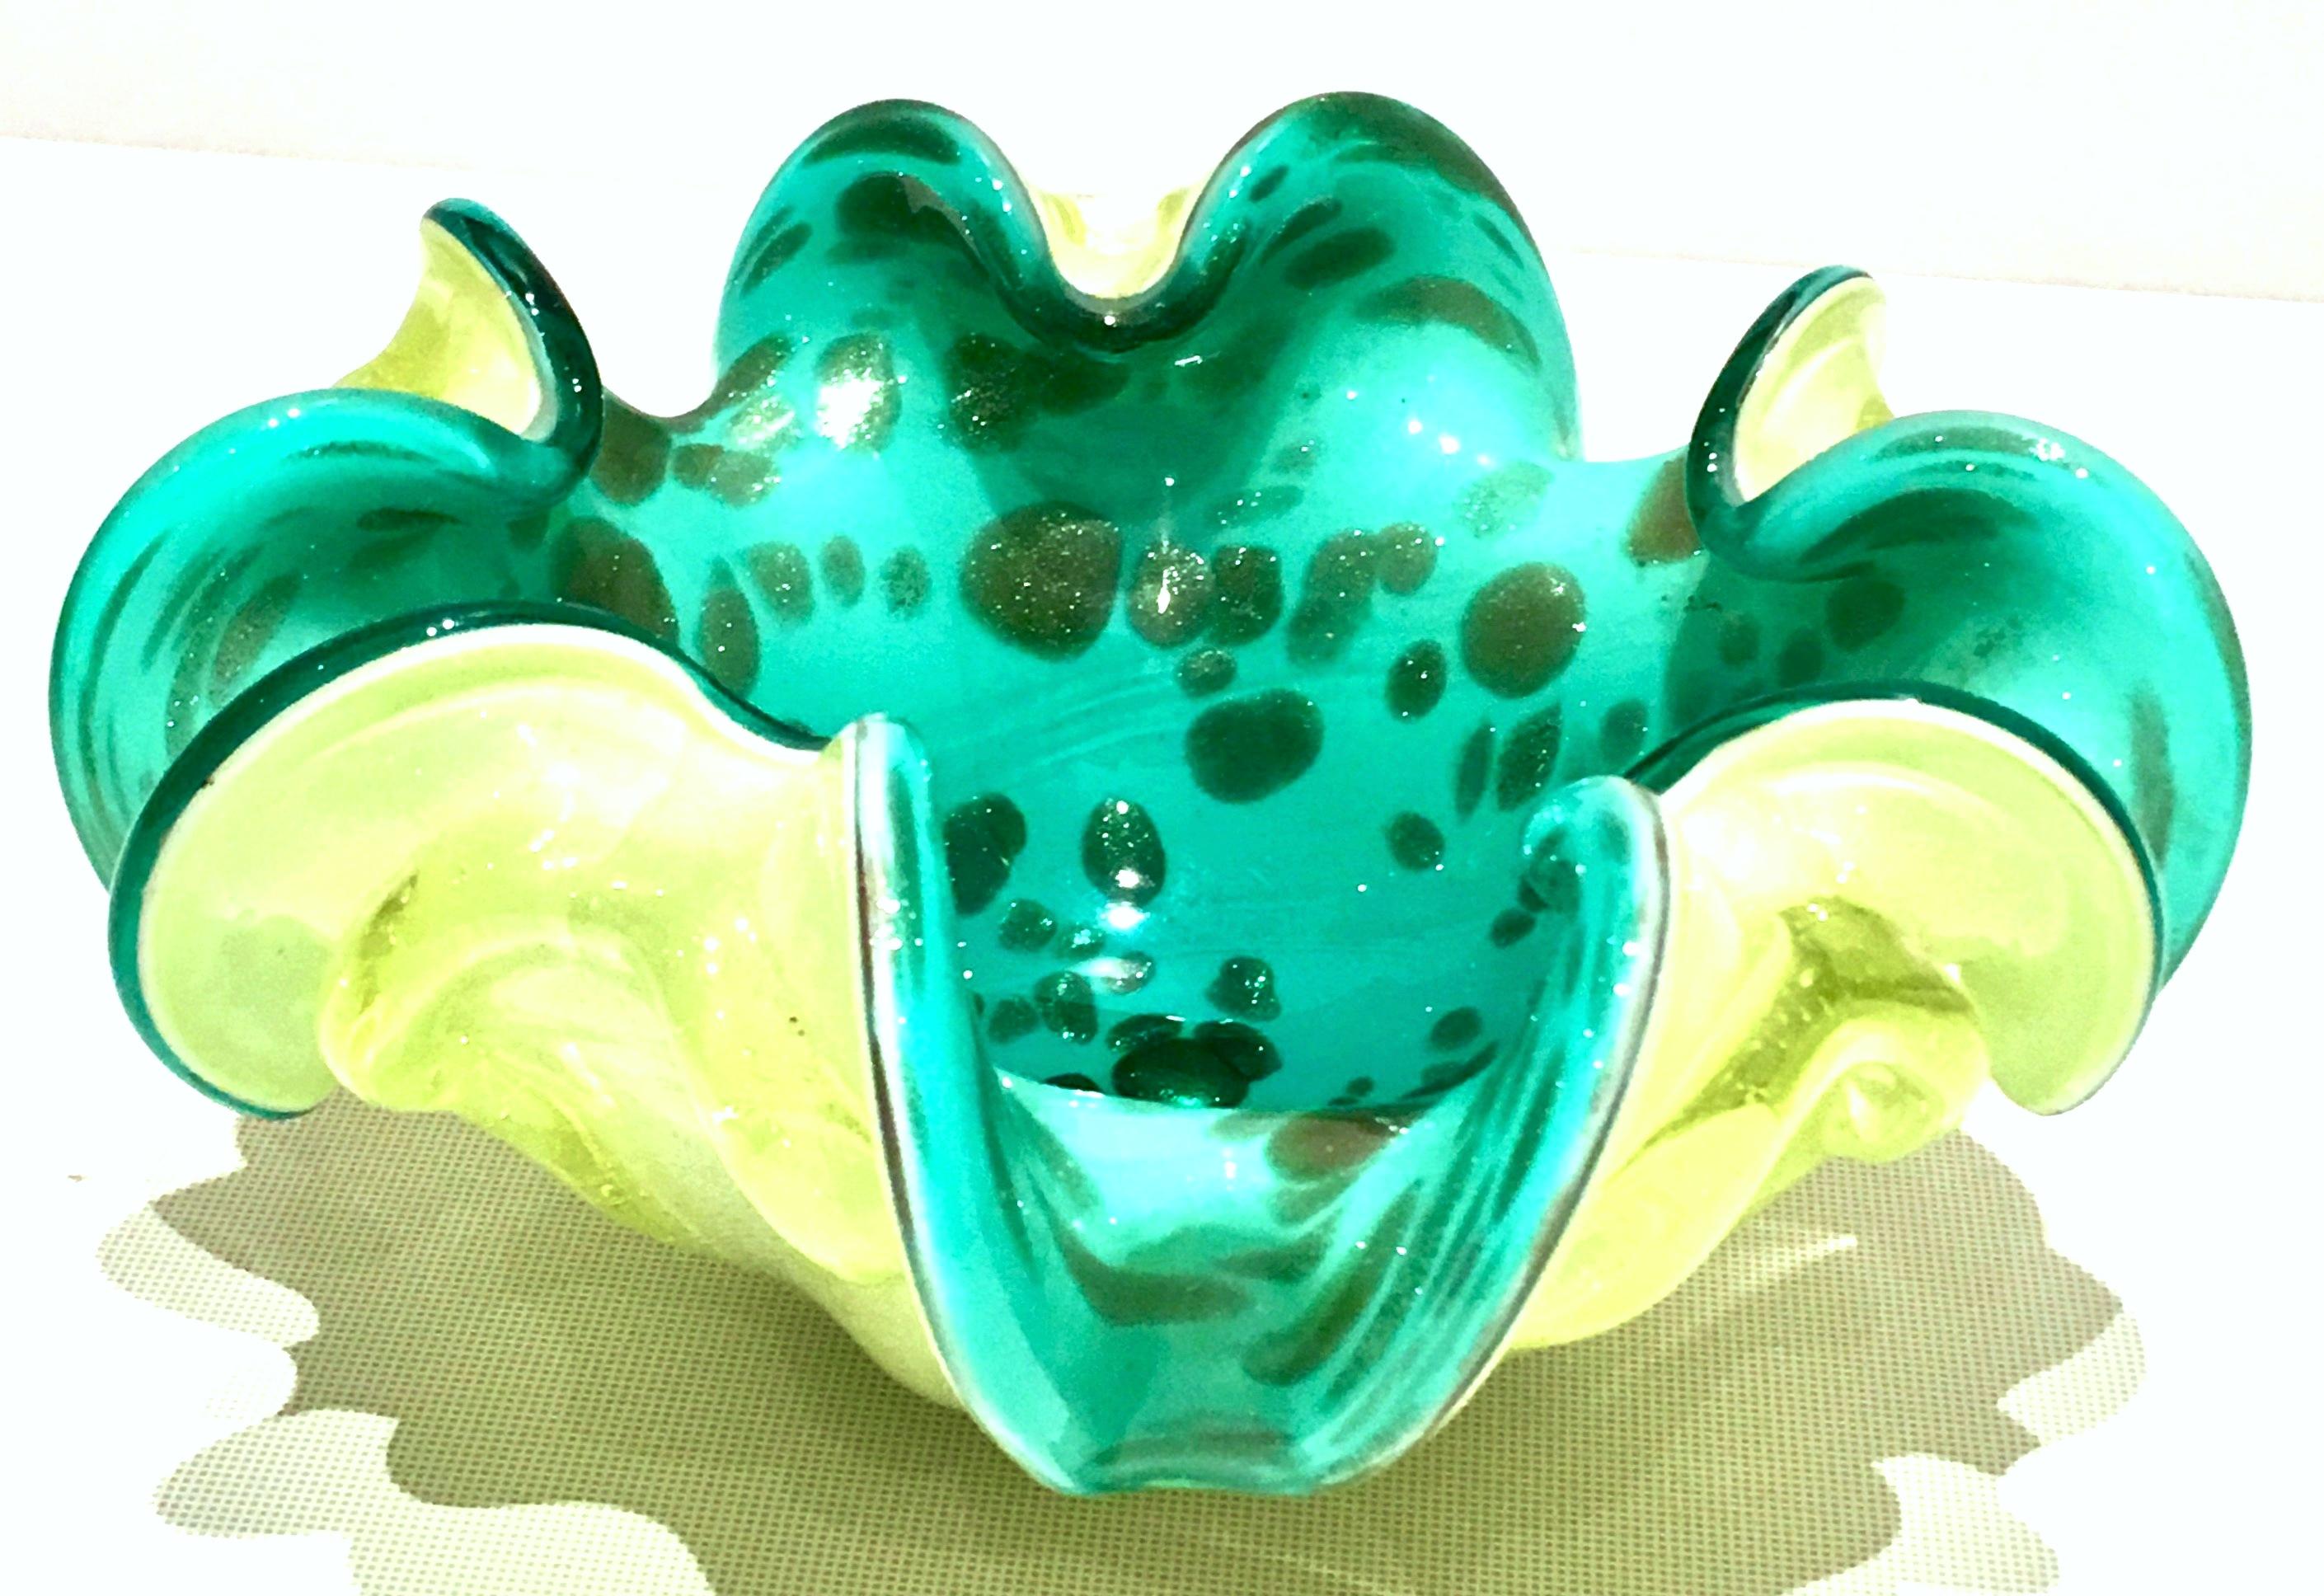 1950s Italian Murano Glass turquoise and Chartreuse ruffle bowl with copper and gold fleck detail. This is a very unique and special piece.